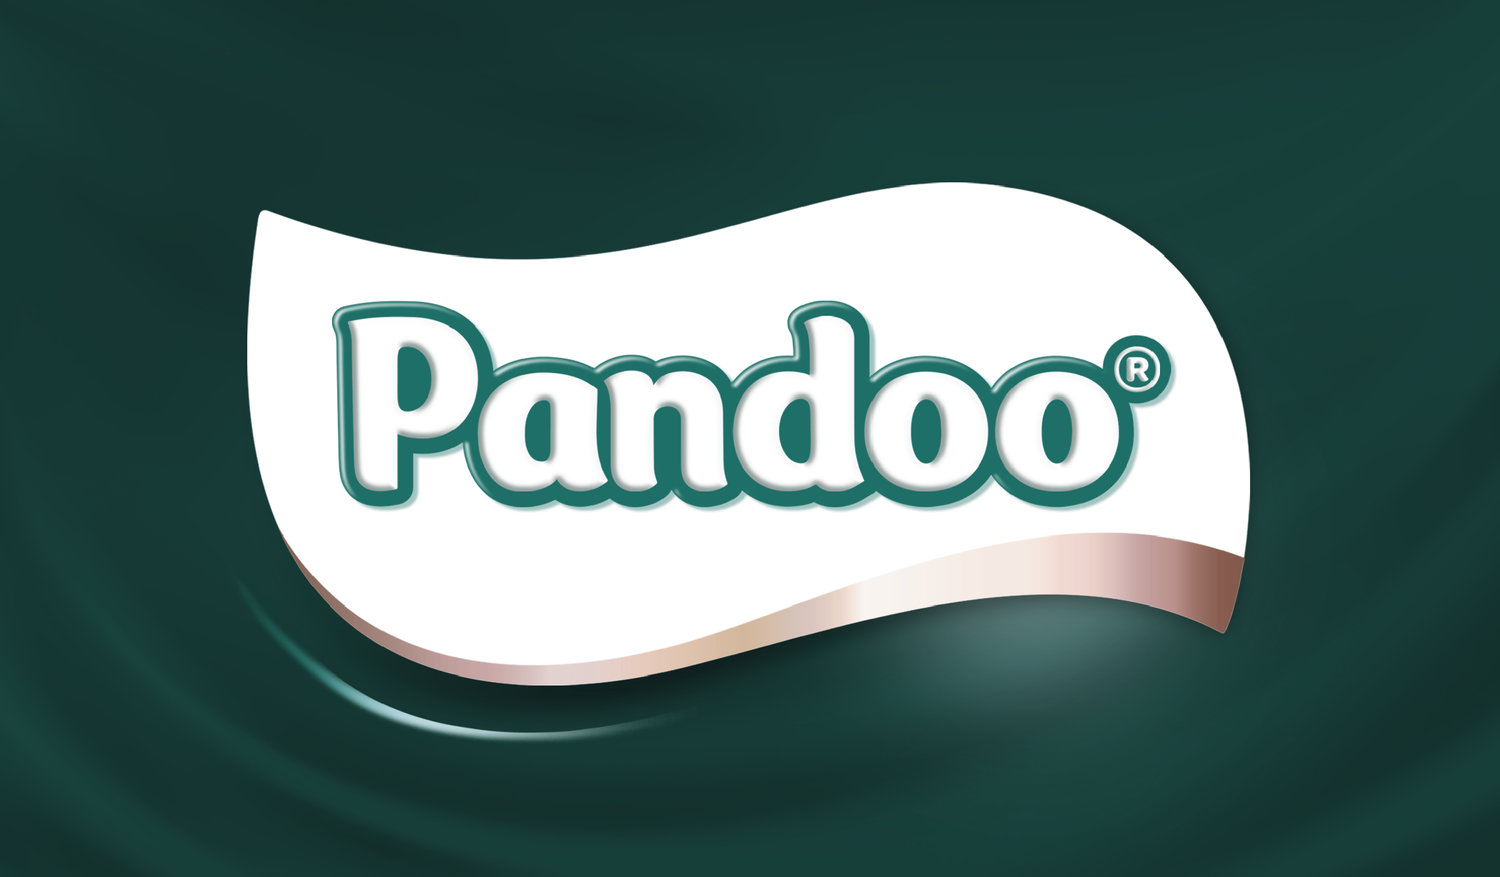 Branding and Packaging Design for Pandoo